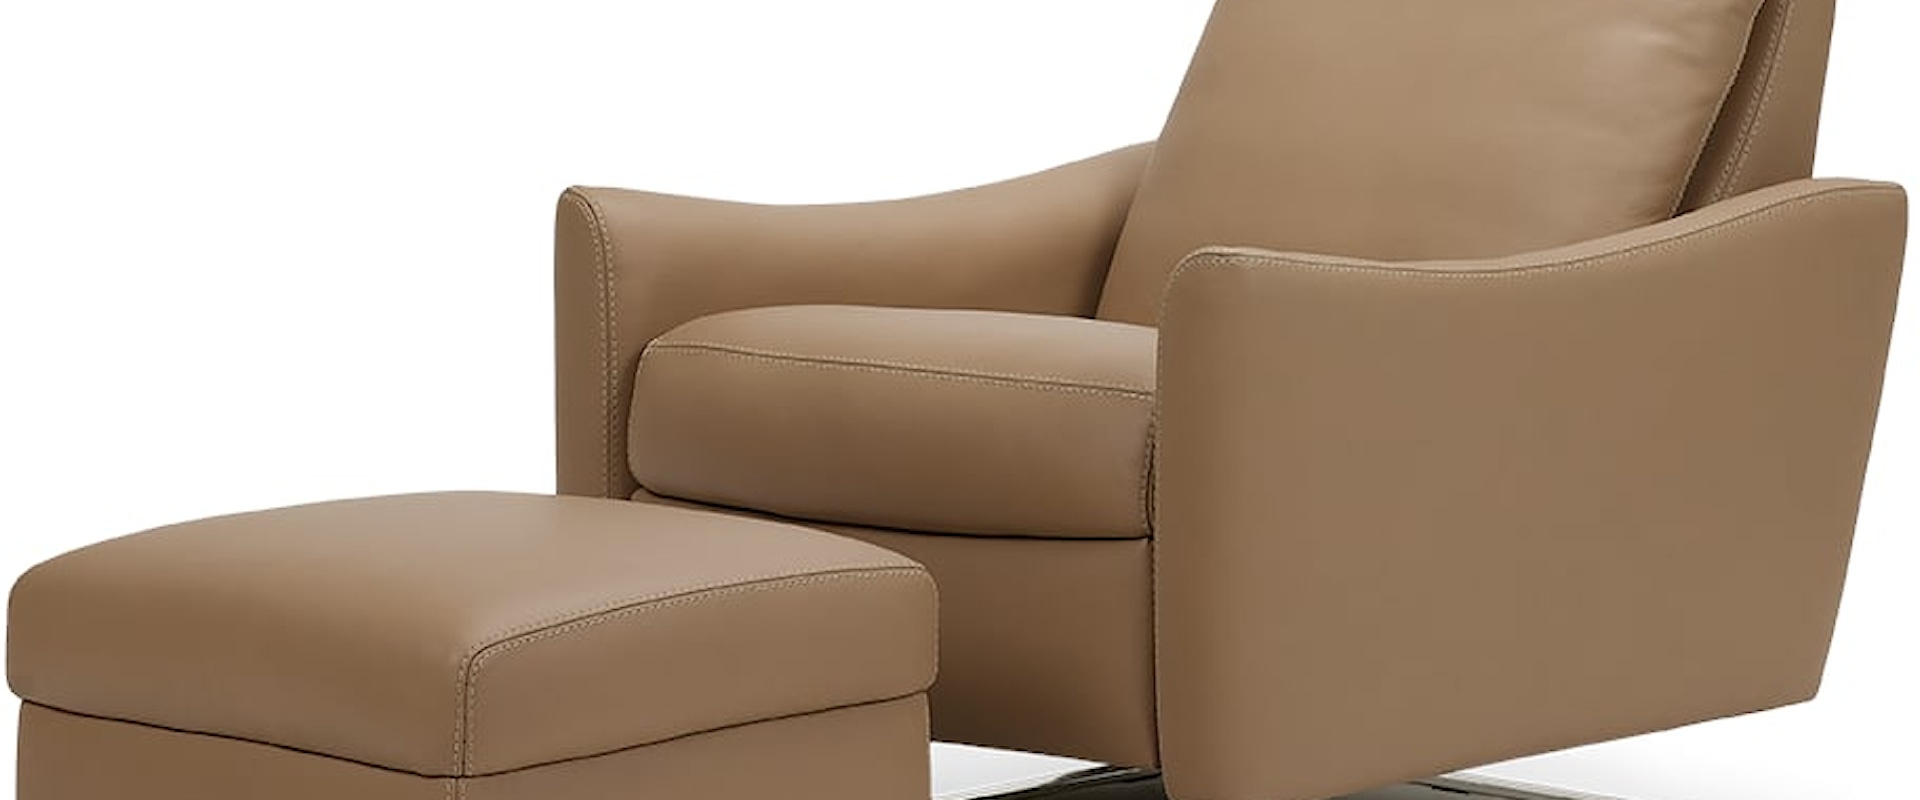 X-Large Ontario Comfort Air Chair and Ottoman Set